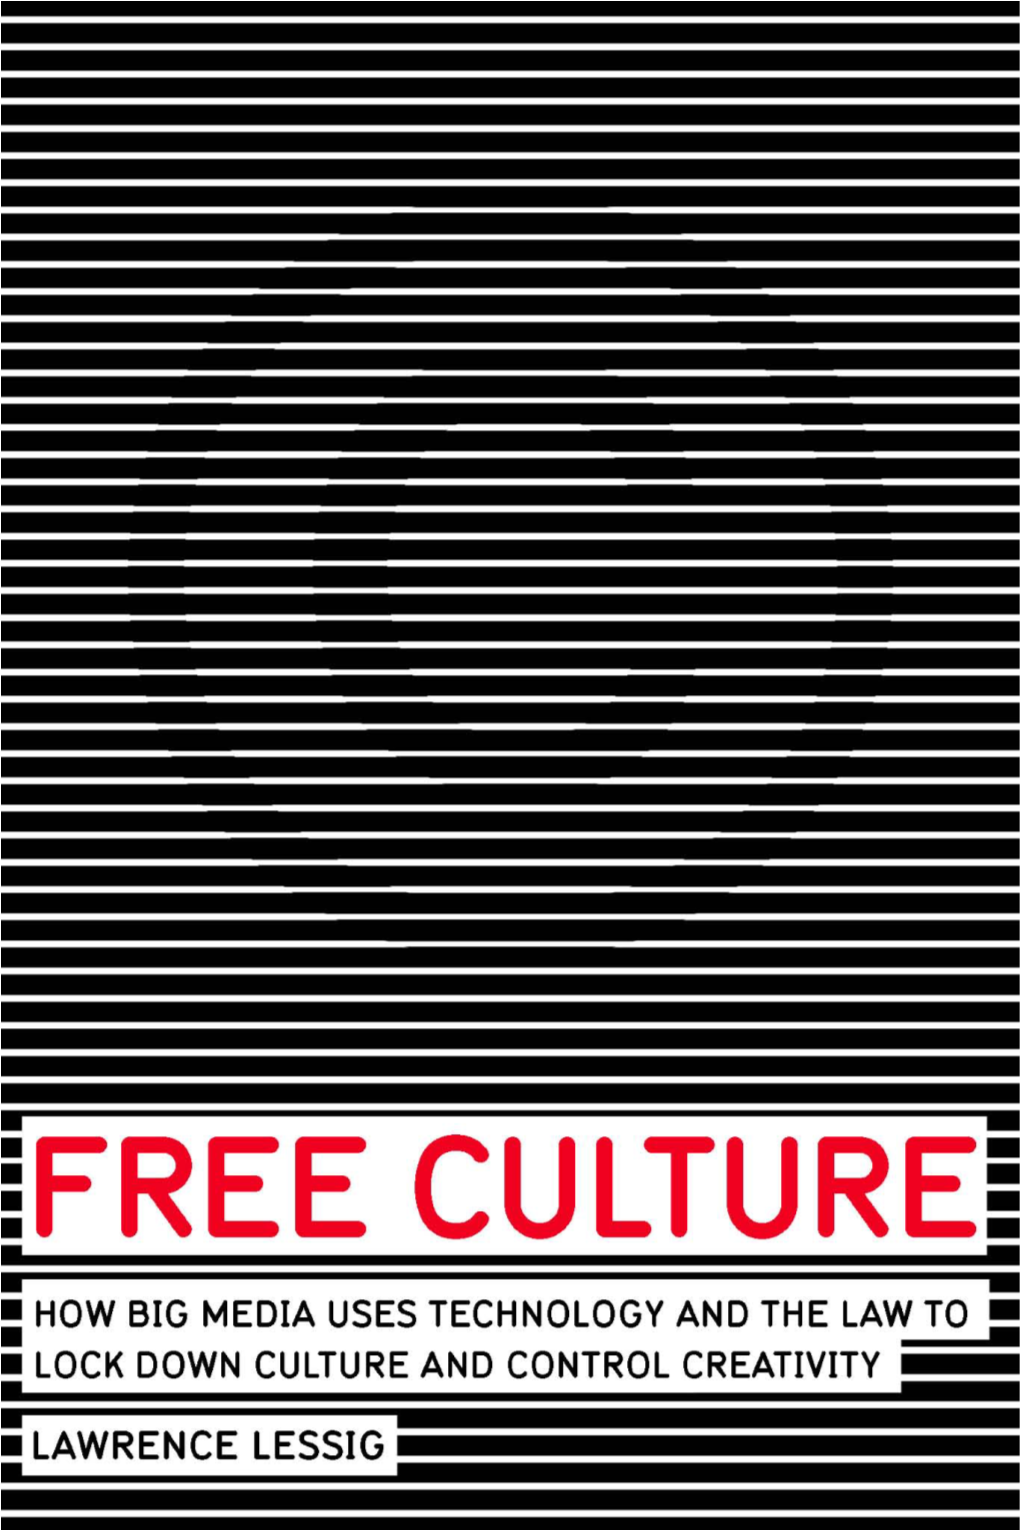 Free Culture Is Licensed Under a Creative Commons License